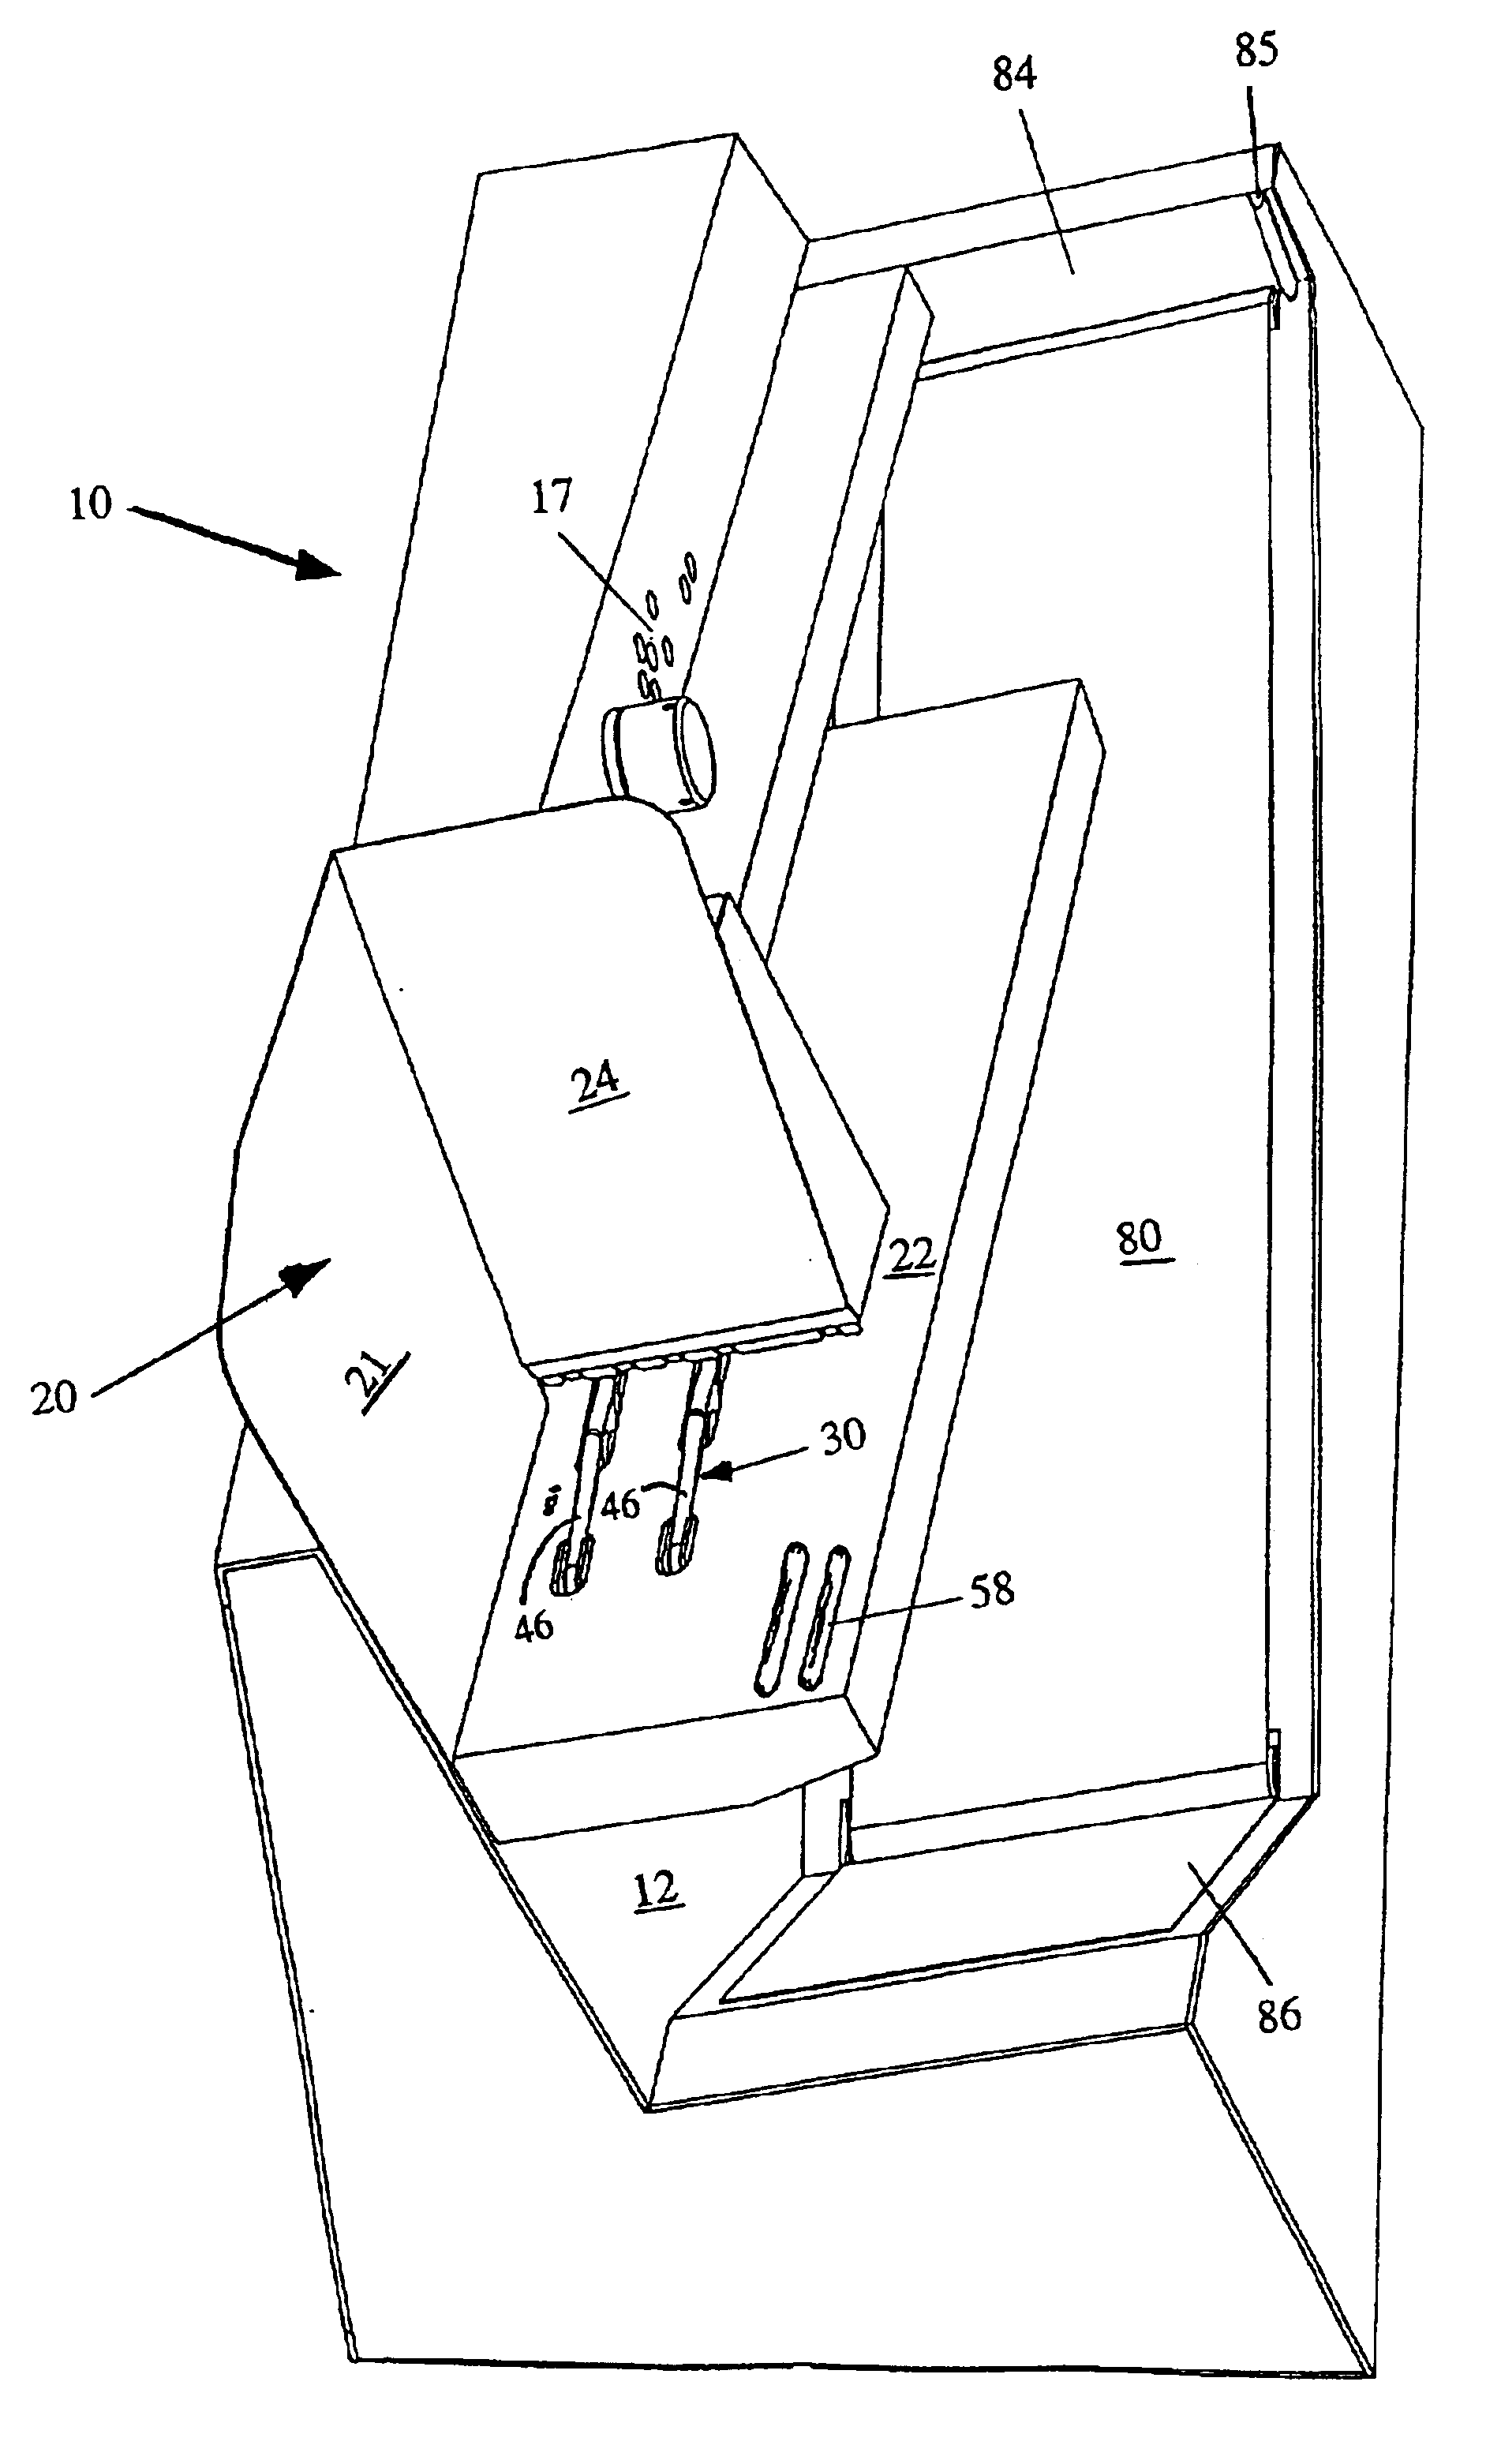 Apparatus for opening envelopes